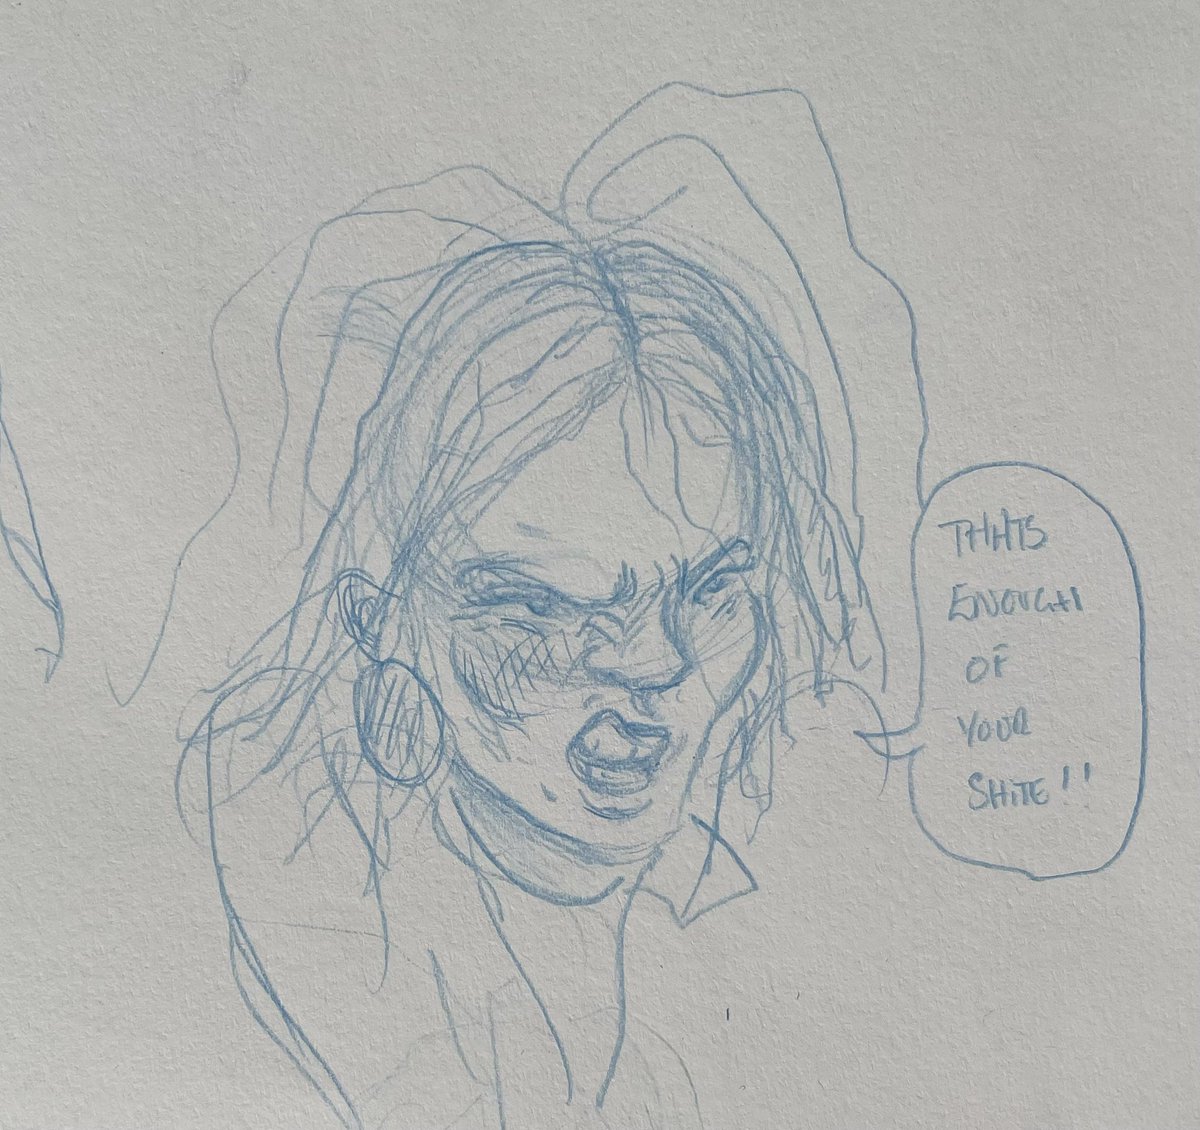 Blue pencil rough. Trying for expression. #expression #faces #character #rough #comics #thenightlifecomic #enoughofyourshit #bluepencil #sketch #sketchbook